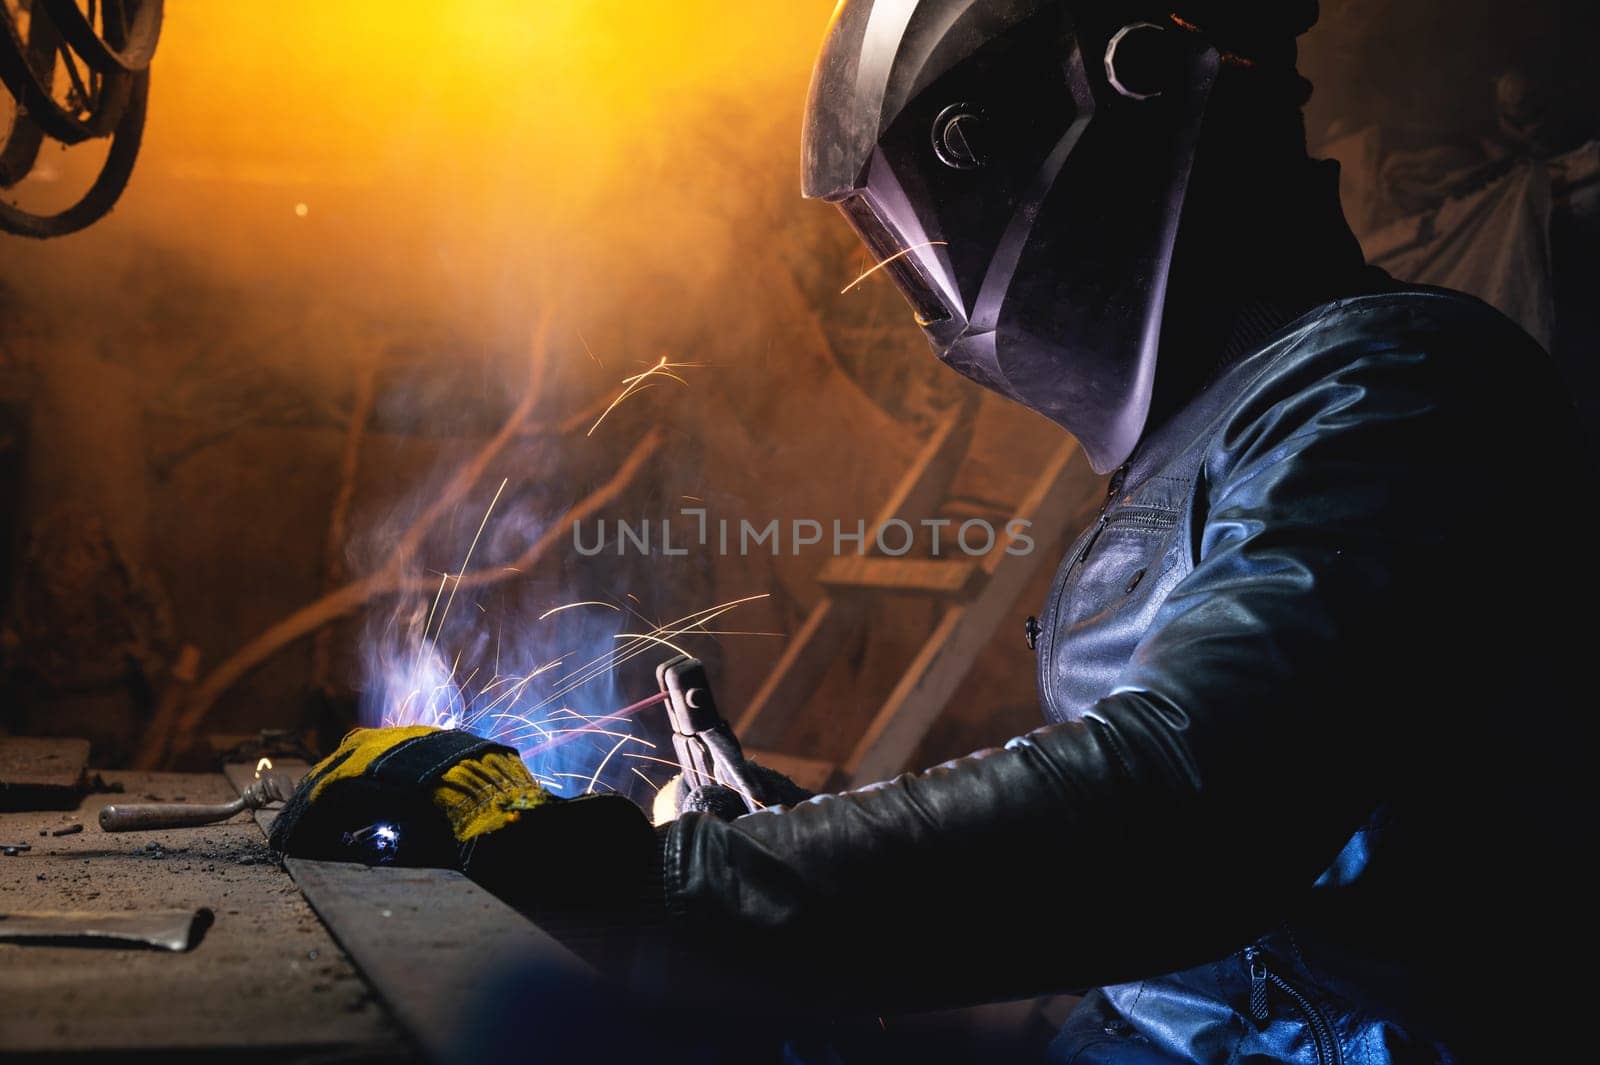 A male welder in a leather jacket carries out welding work in a home shed against the background of a brick wall. Handicraft production of metal structures and products by yanik88